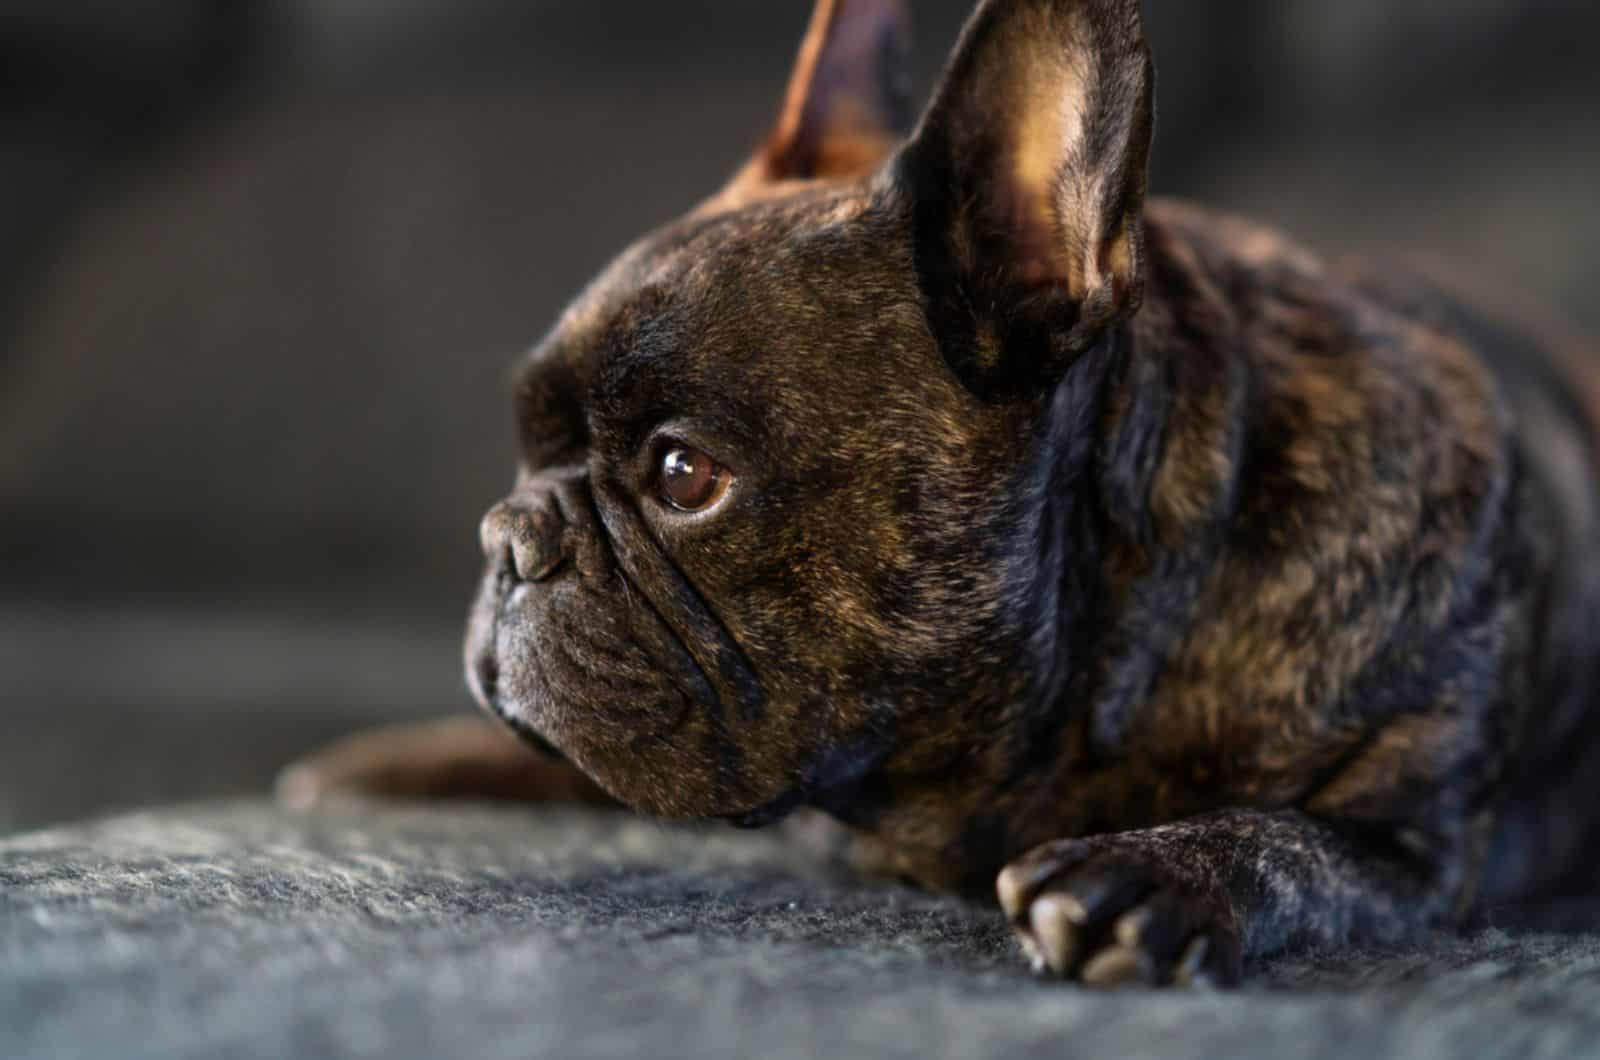 brindle color french bulldog lying on the carpet